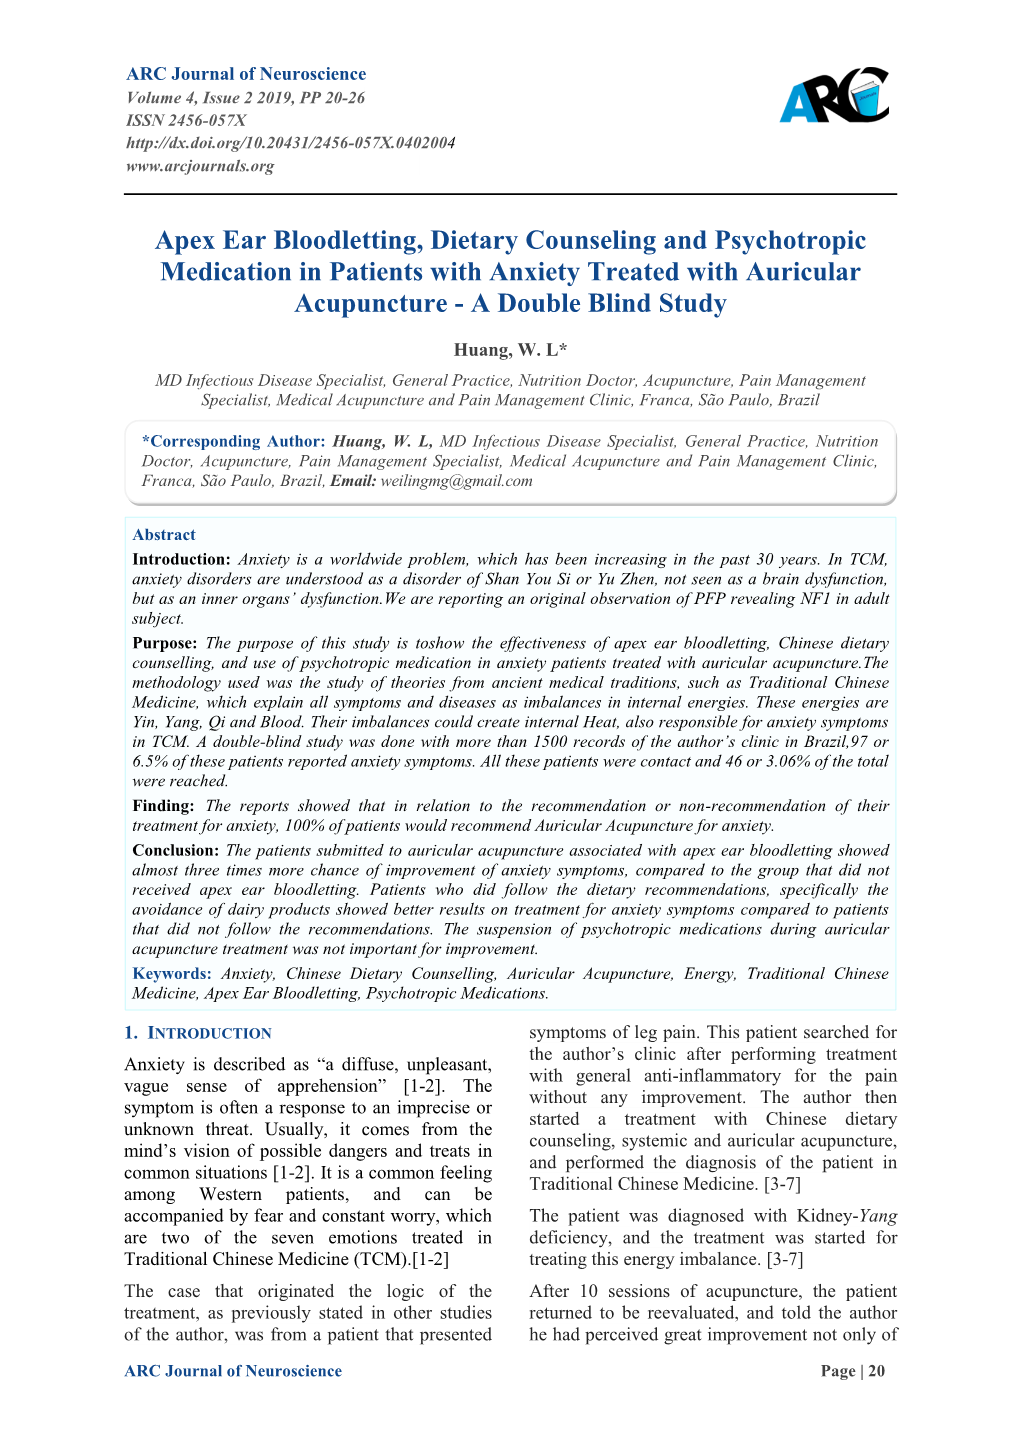 Apex Ear Bloodletting, Dietary Counseling and Psychotropic Medication in Patients with Anxiety Treated with Auricular Acupuncture - a Double Blind Study